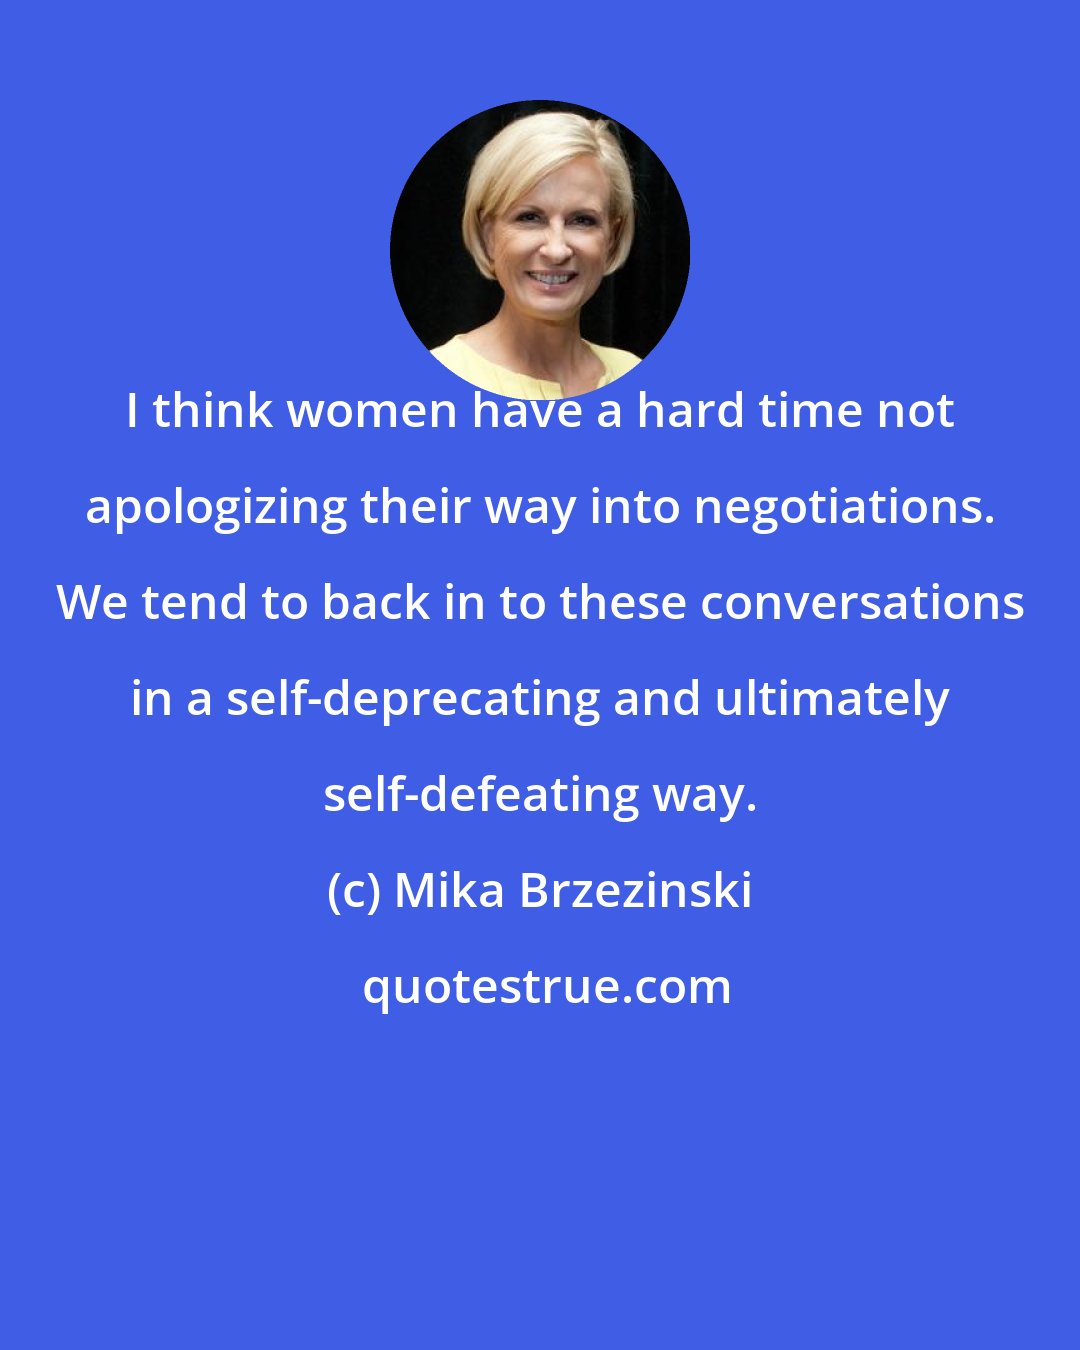 Mika Brzezinski: I think women have a hard time not apologizing their way into negotiations. We tend to back in to these conversations in a self-deprecating and ultimately self-defeating way.